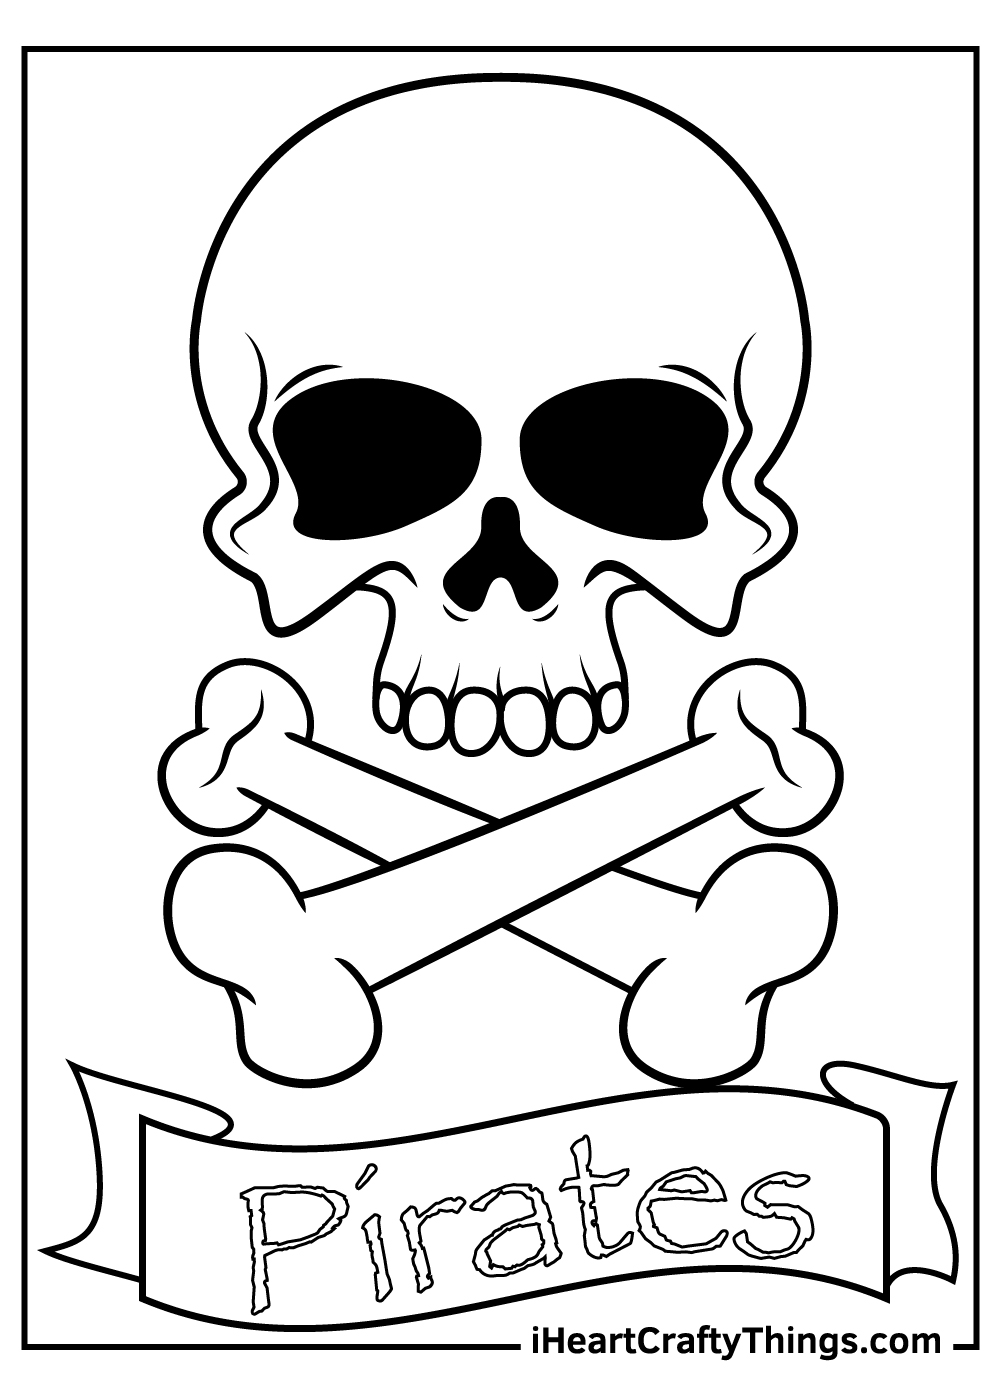 Pirates coloring pages free printables